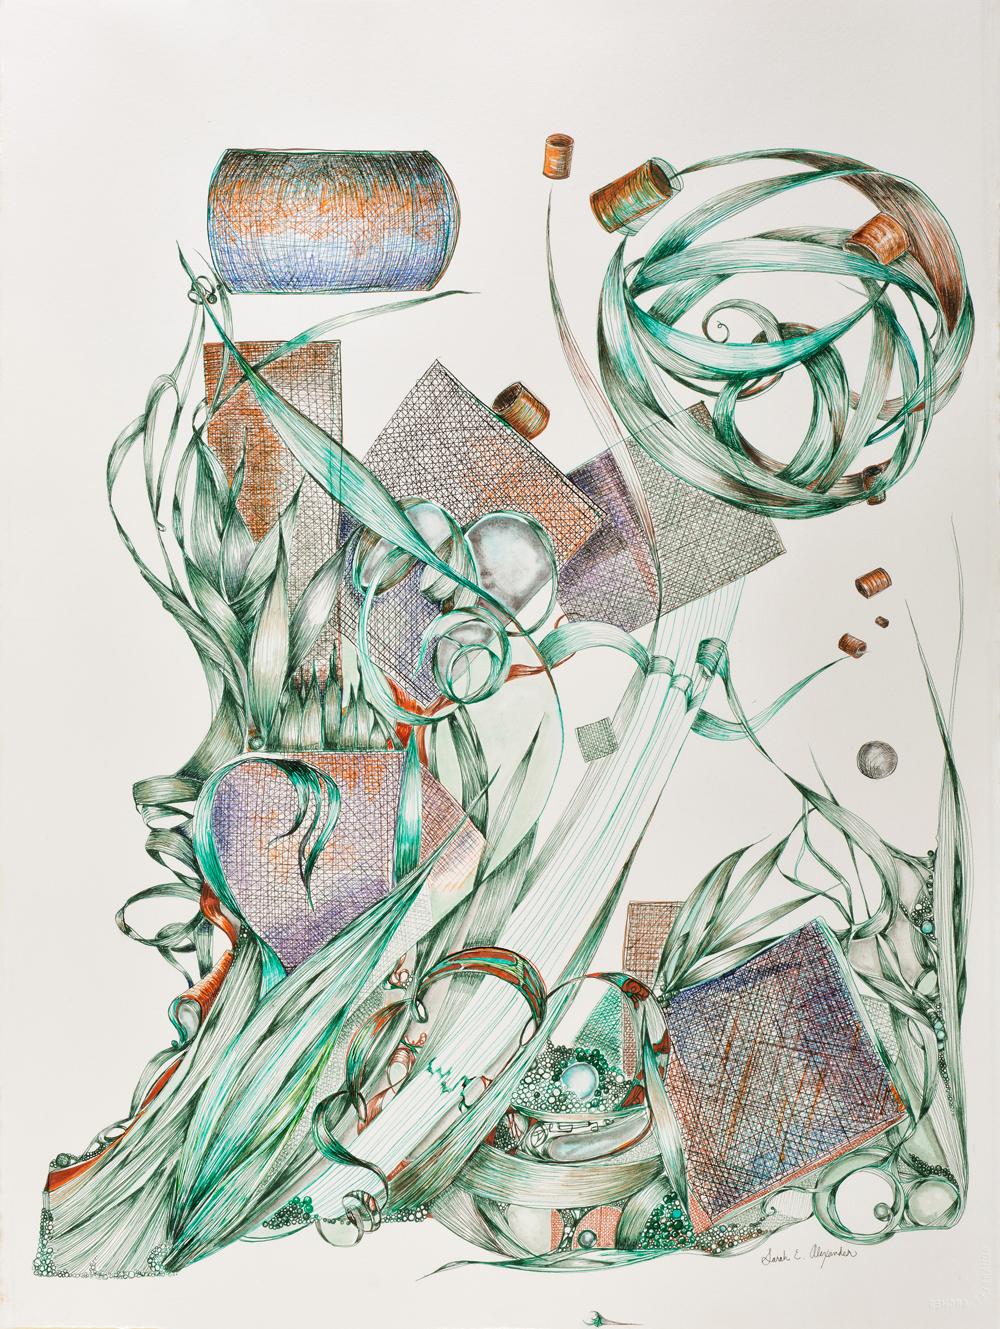 "Elude", contemporary, art deco, teal, green, amber, watercolor, drawing - Painting by Sarah Alexander